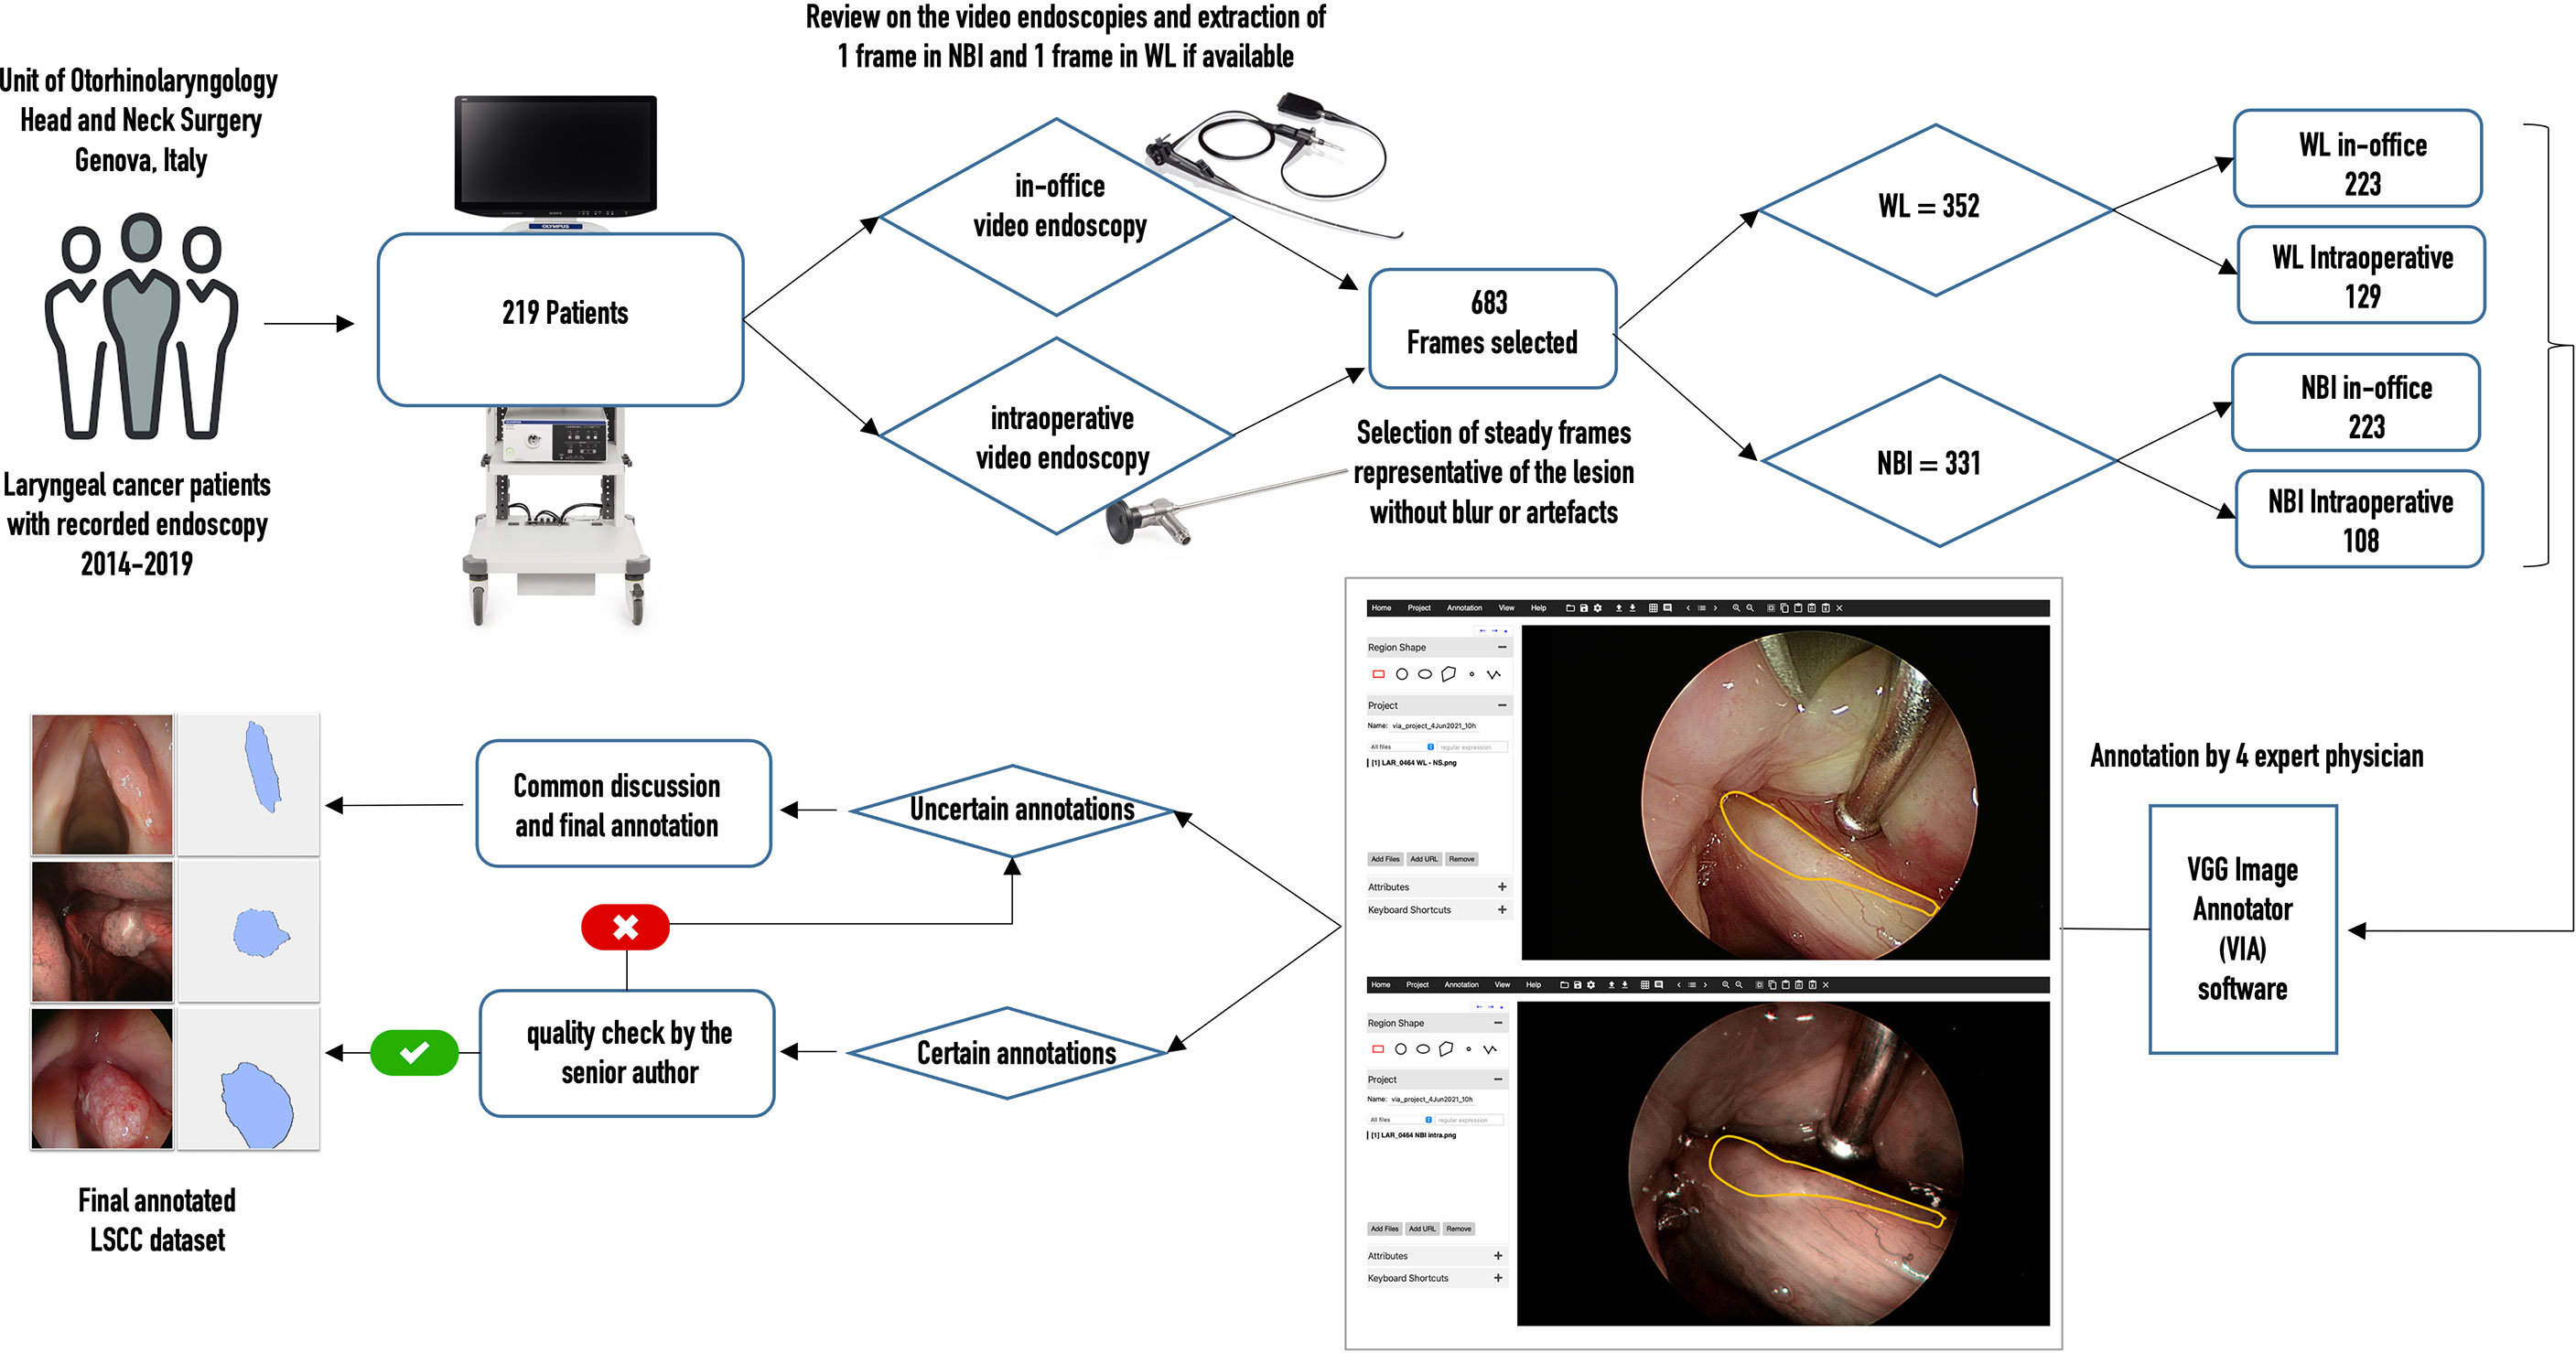 Xxx Jks Hd Vidio - Frontiers | Videomics of the Upper Aero-Digestive Tract Cancer: Deep  Learning Applied to White Light and Narrow Band Imaging for Automatic  Segmentation of Endoscopic Images